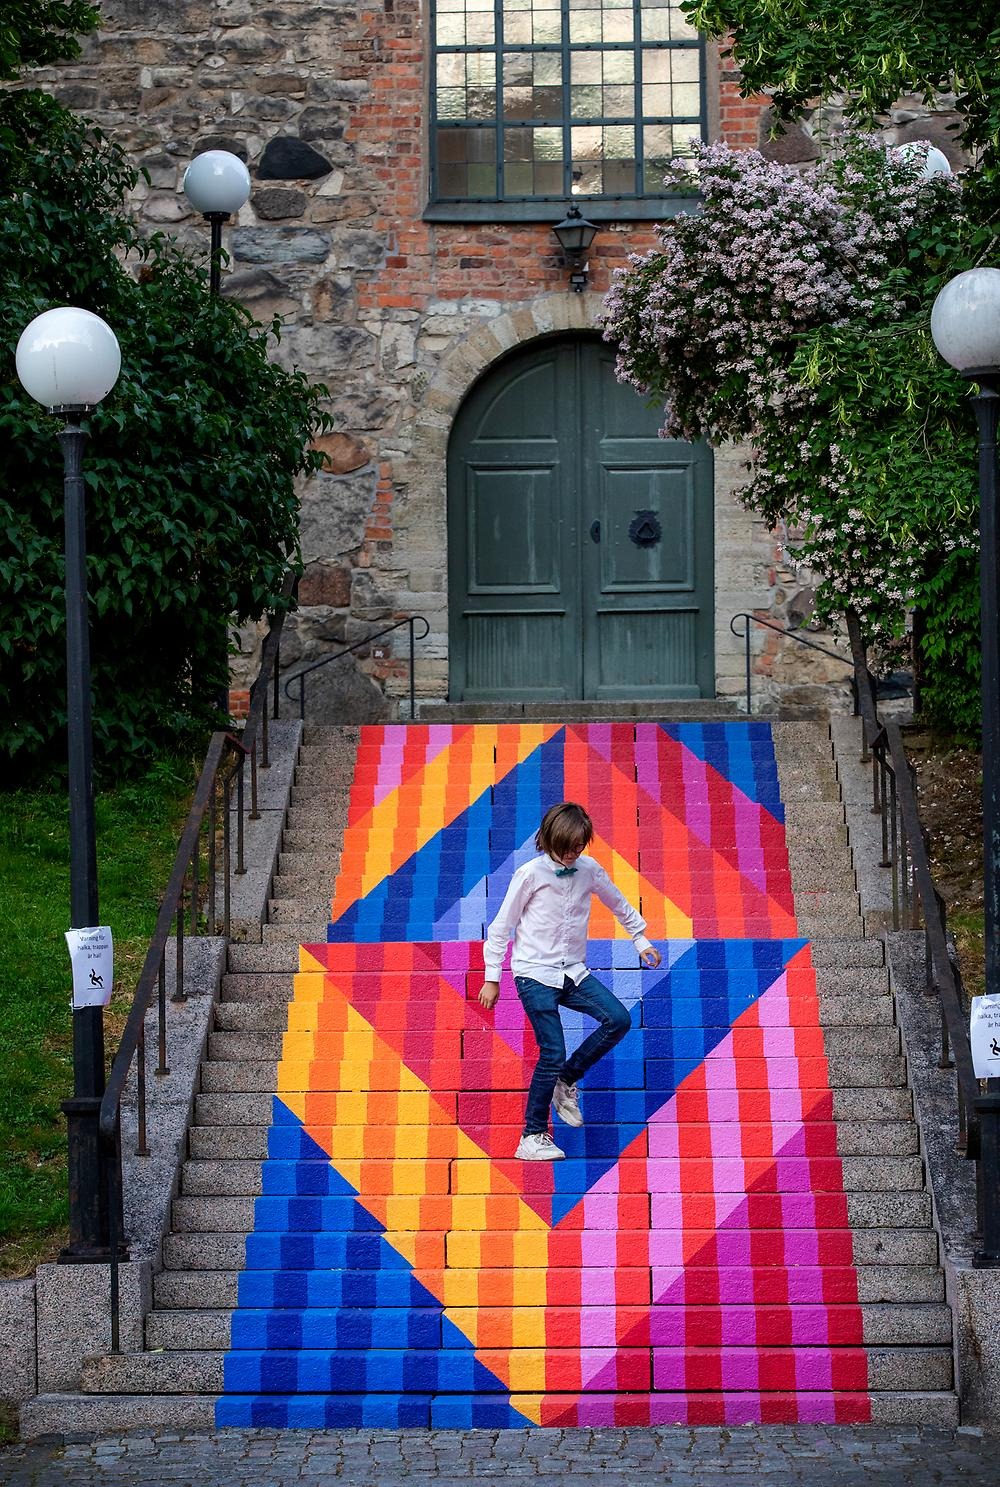 The stairs up to St. Nicholas Church are illuminated by a colorful work of art in different geometric shapes that carry the steps between different ages. You can't help but be happy when you see this fantastic staircase! In the background you can see St. Nicholas Church, green trees and a boy with a shirt and bow tie who is jumping around the stairs.